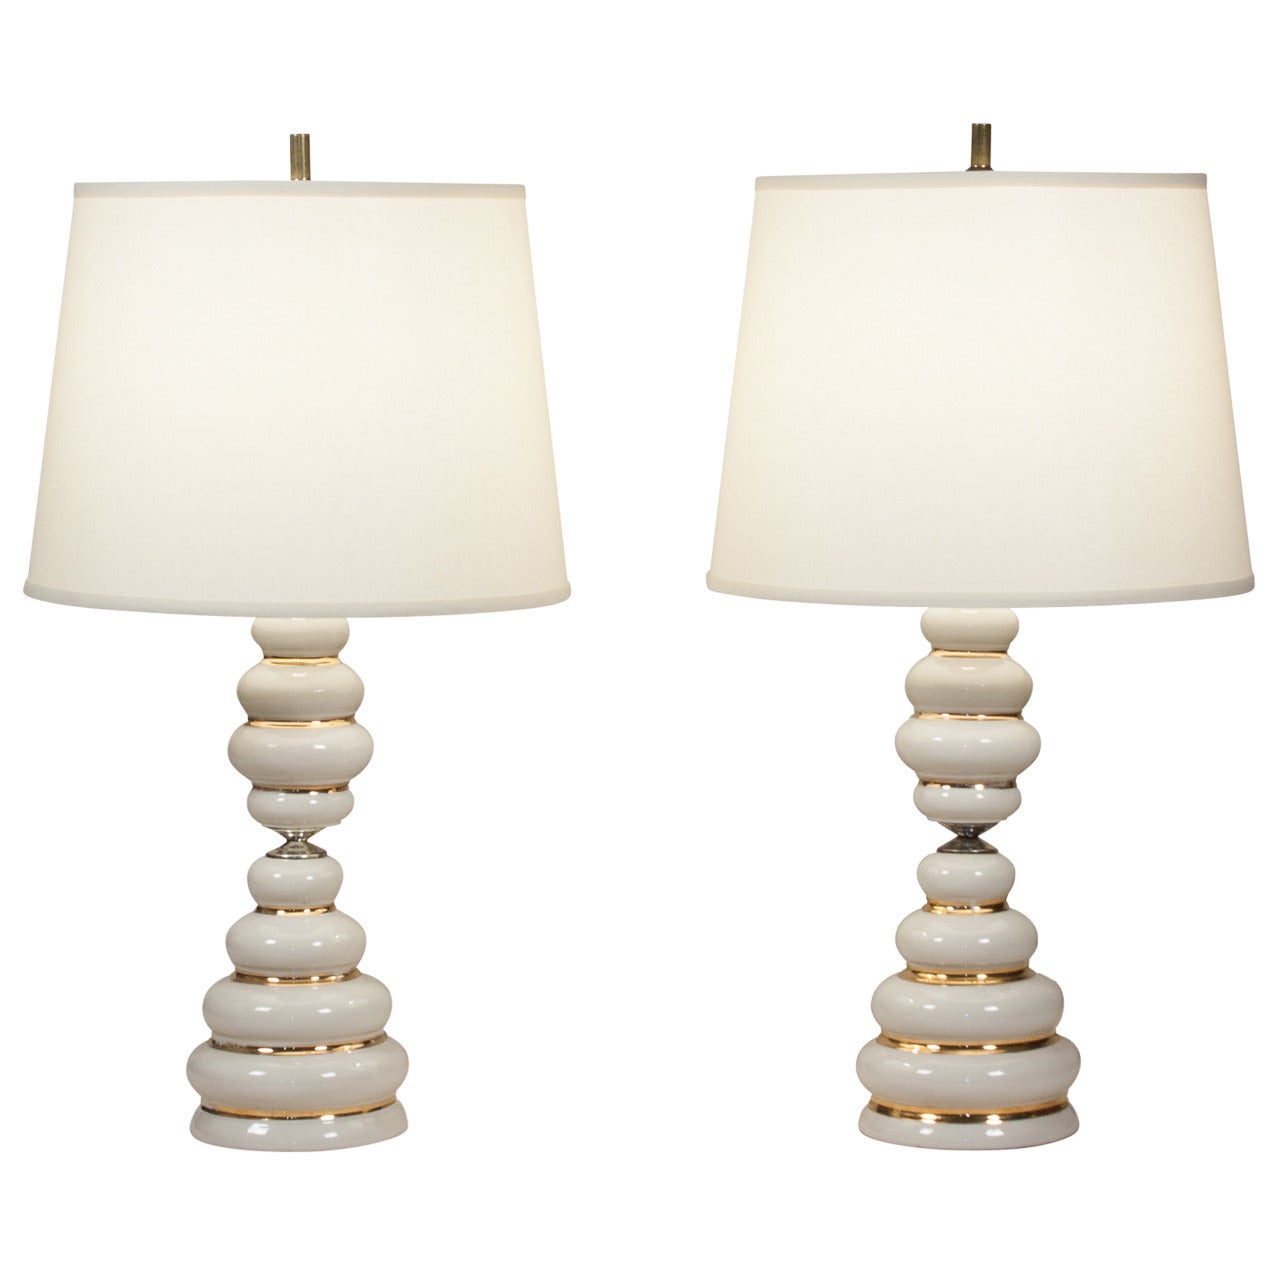 Pair of Stacked Ceramic Table Lamps